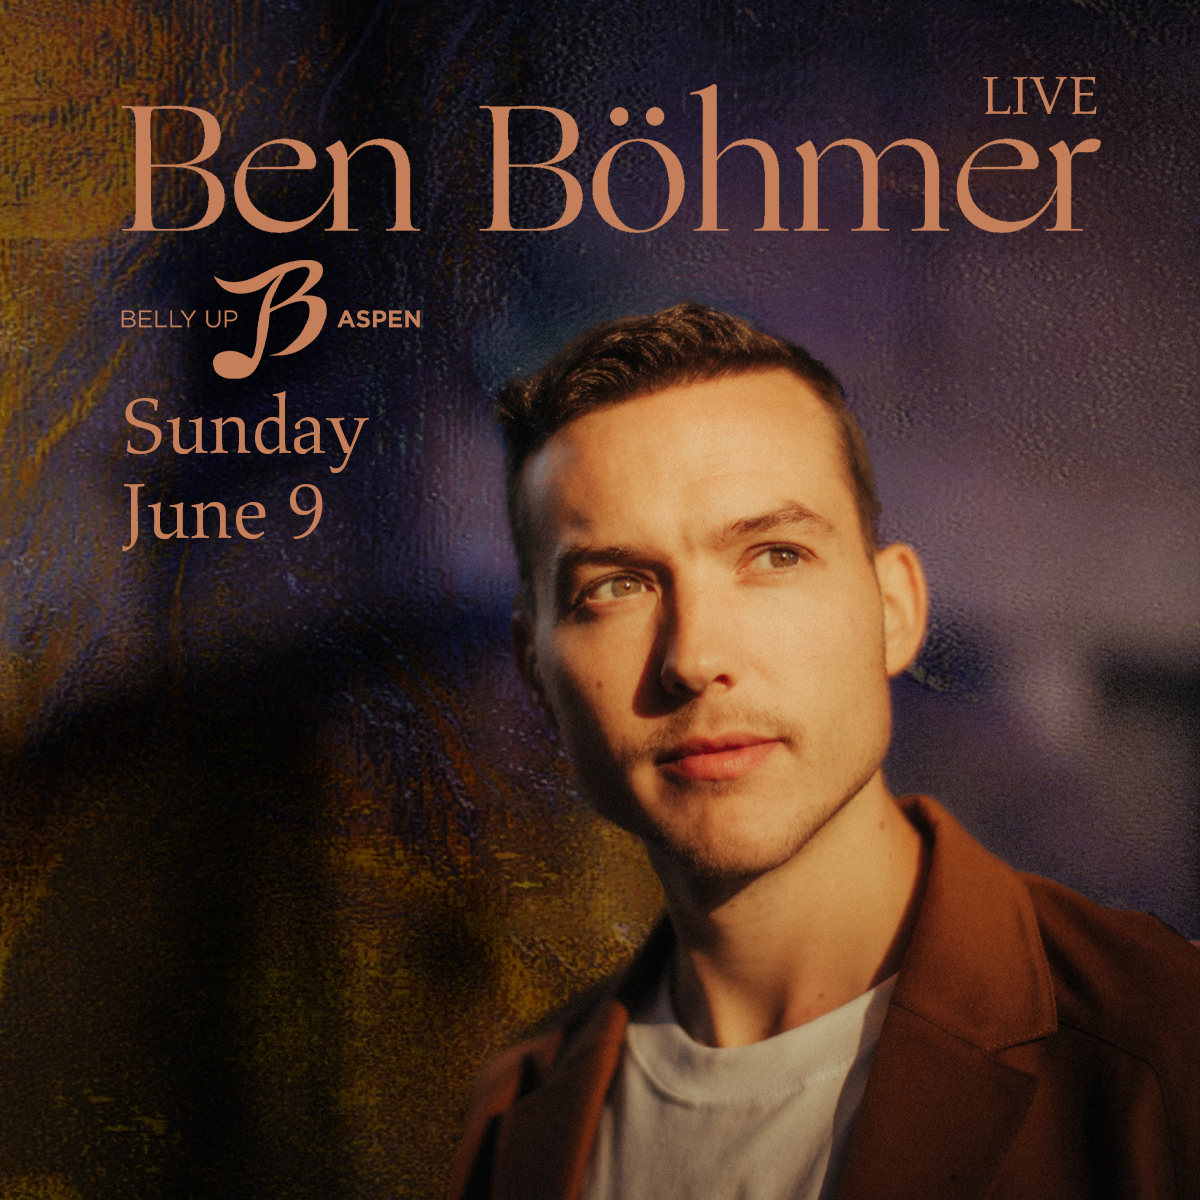 Melodic house DJ/producer Ben Böhmer brings his live show 6/9! Presale starts Thu, 4/25 @ 10am MT. Sign up by 8:30am MT 4/25 to receive the presale code: bit.ly/3W7woV8